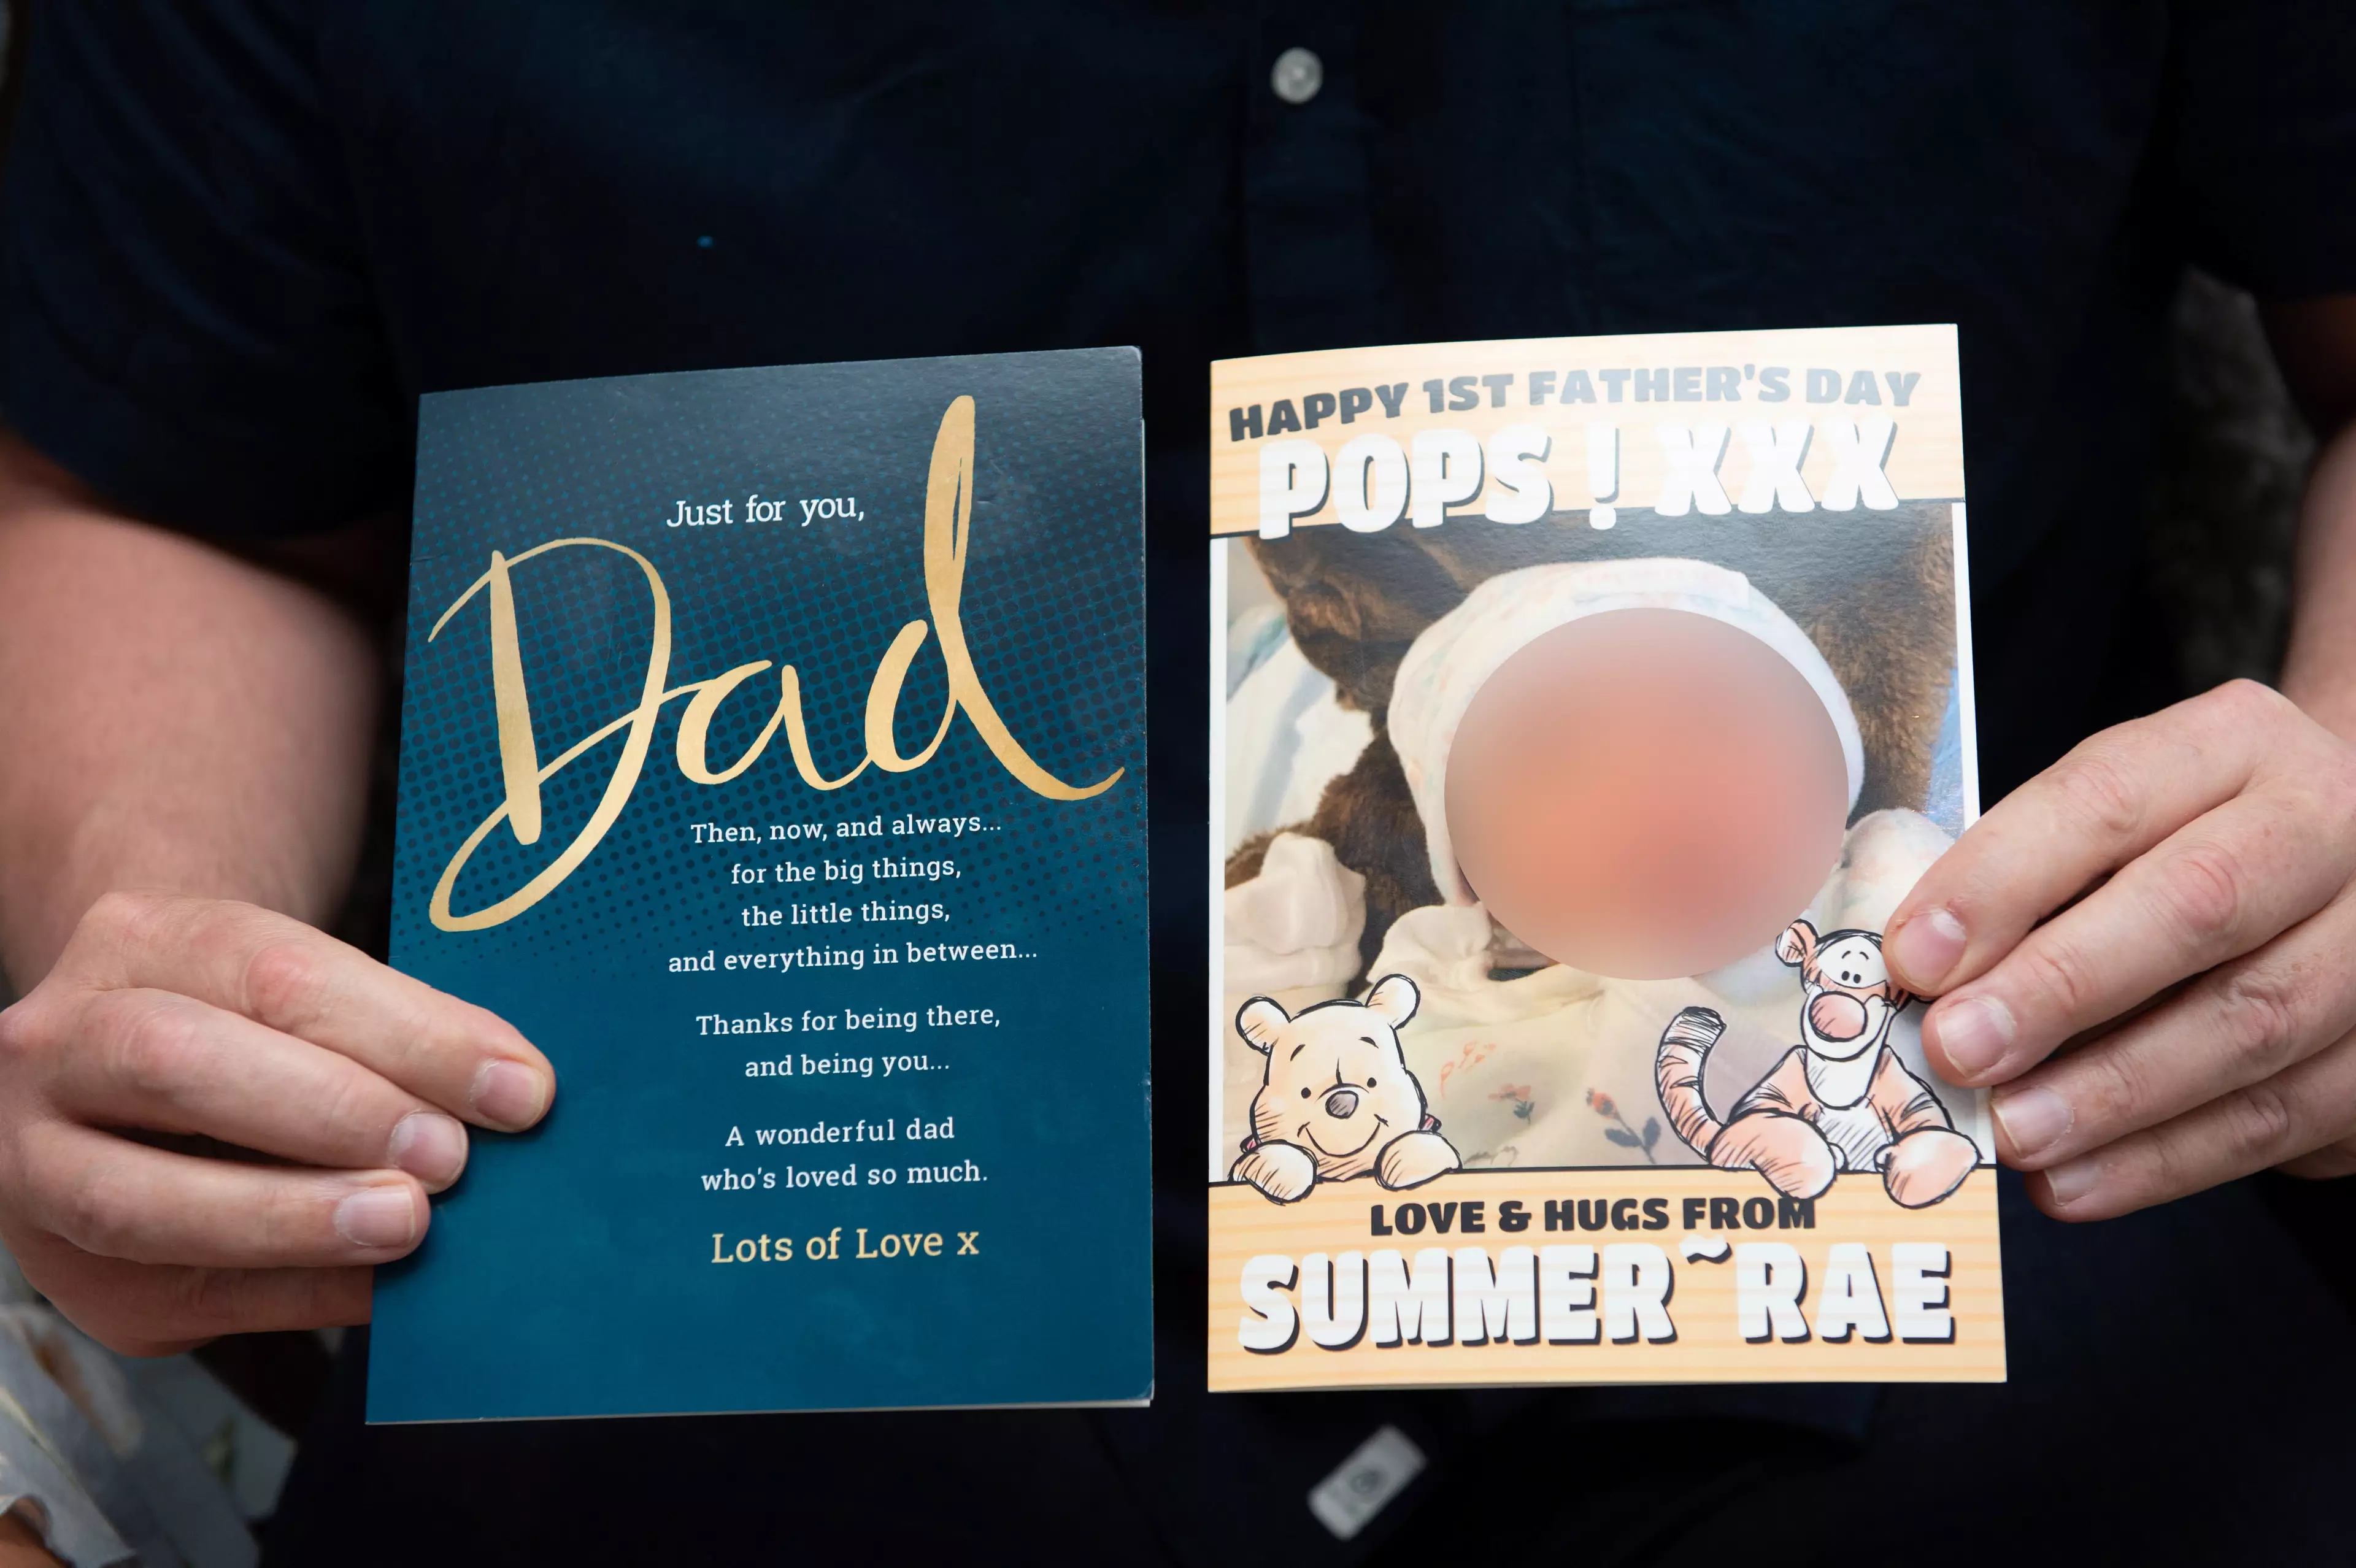 Darren received the wrong Father's Day card in the mail (